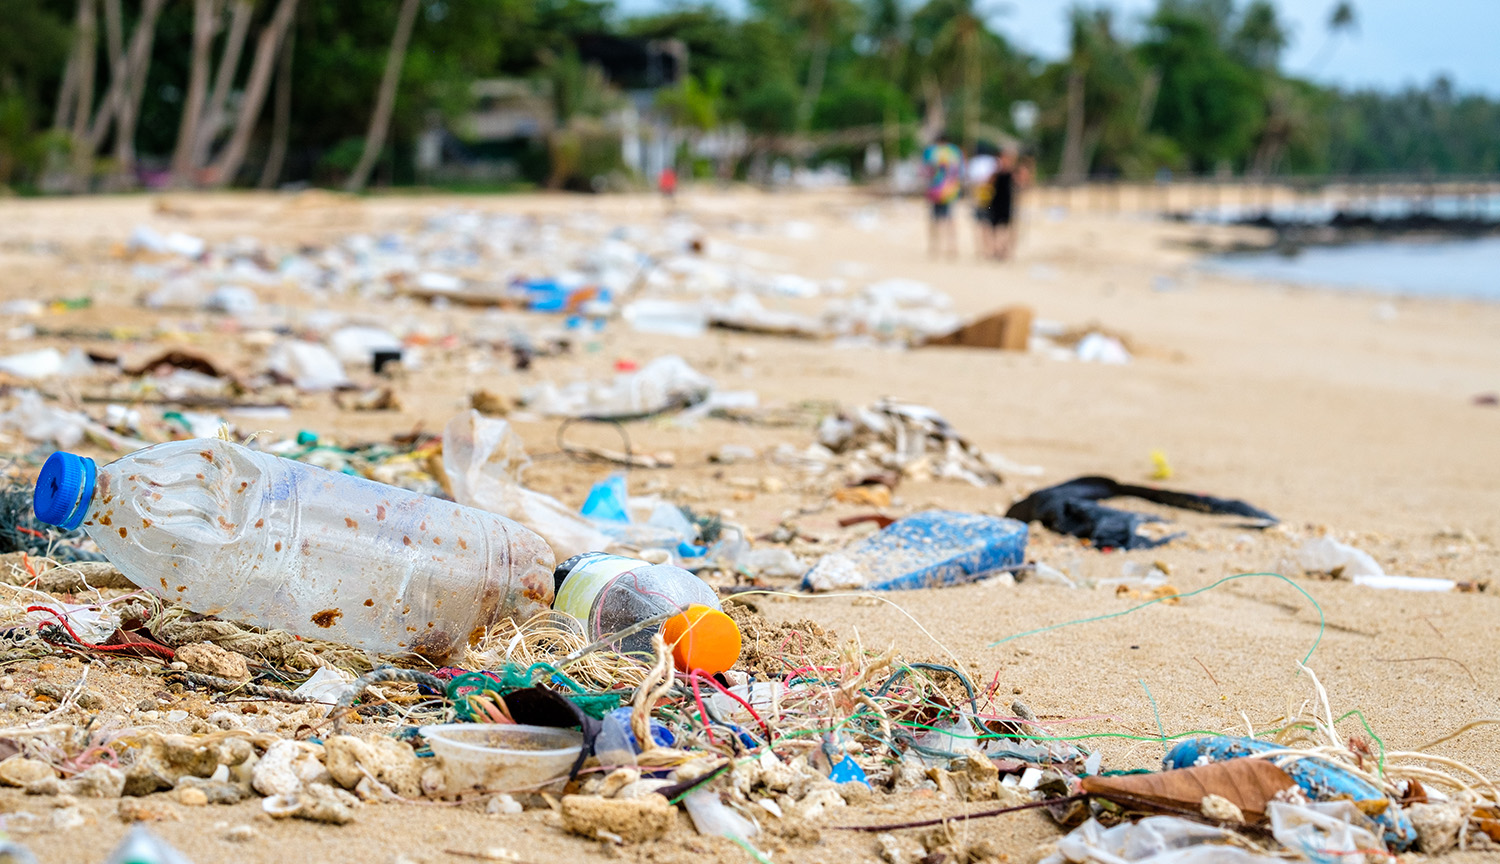 Photo of a beach with various kinds of plastic, including a bottle, littering the sand.